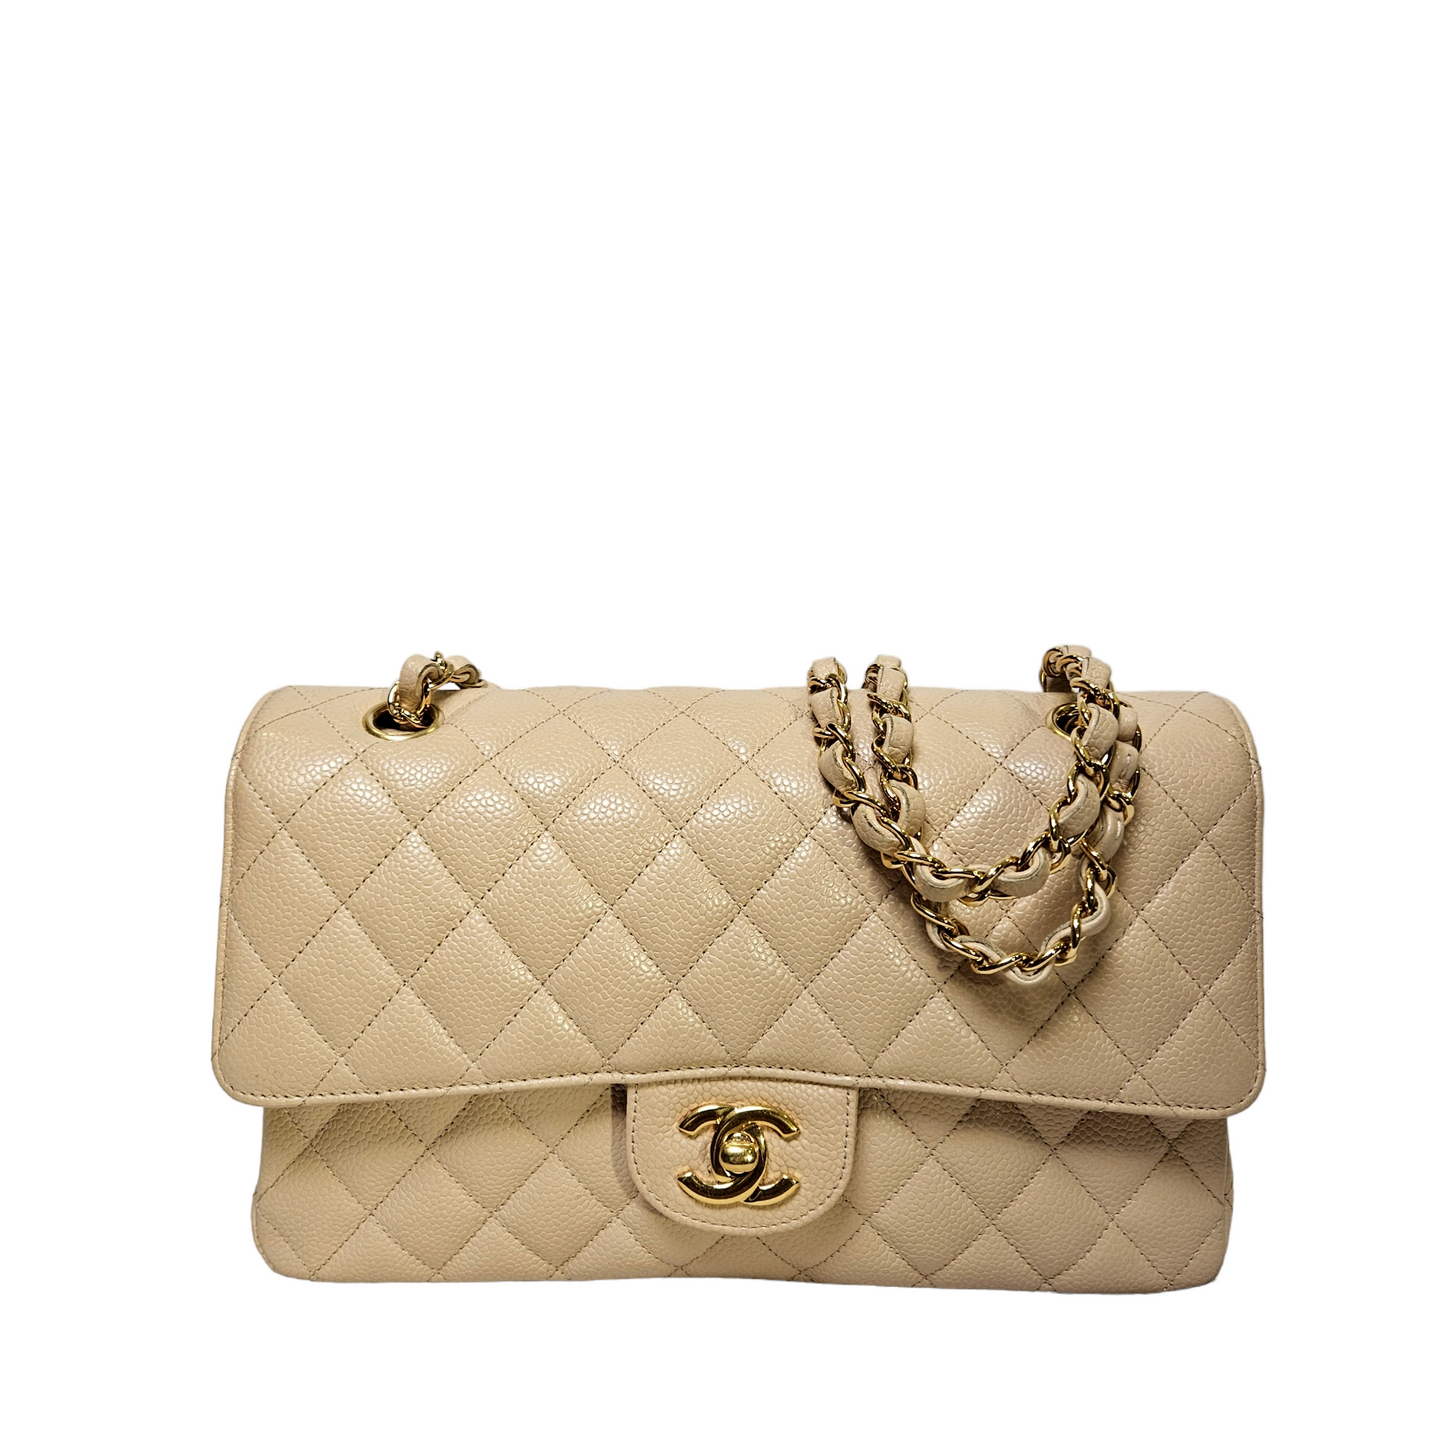 Chanel Classic Medium Double Flap Bag in Beige Caviar Leather